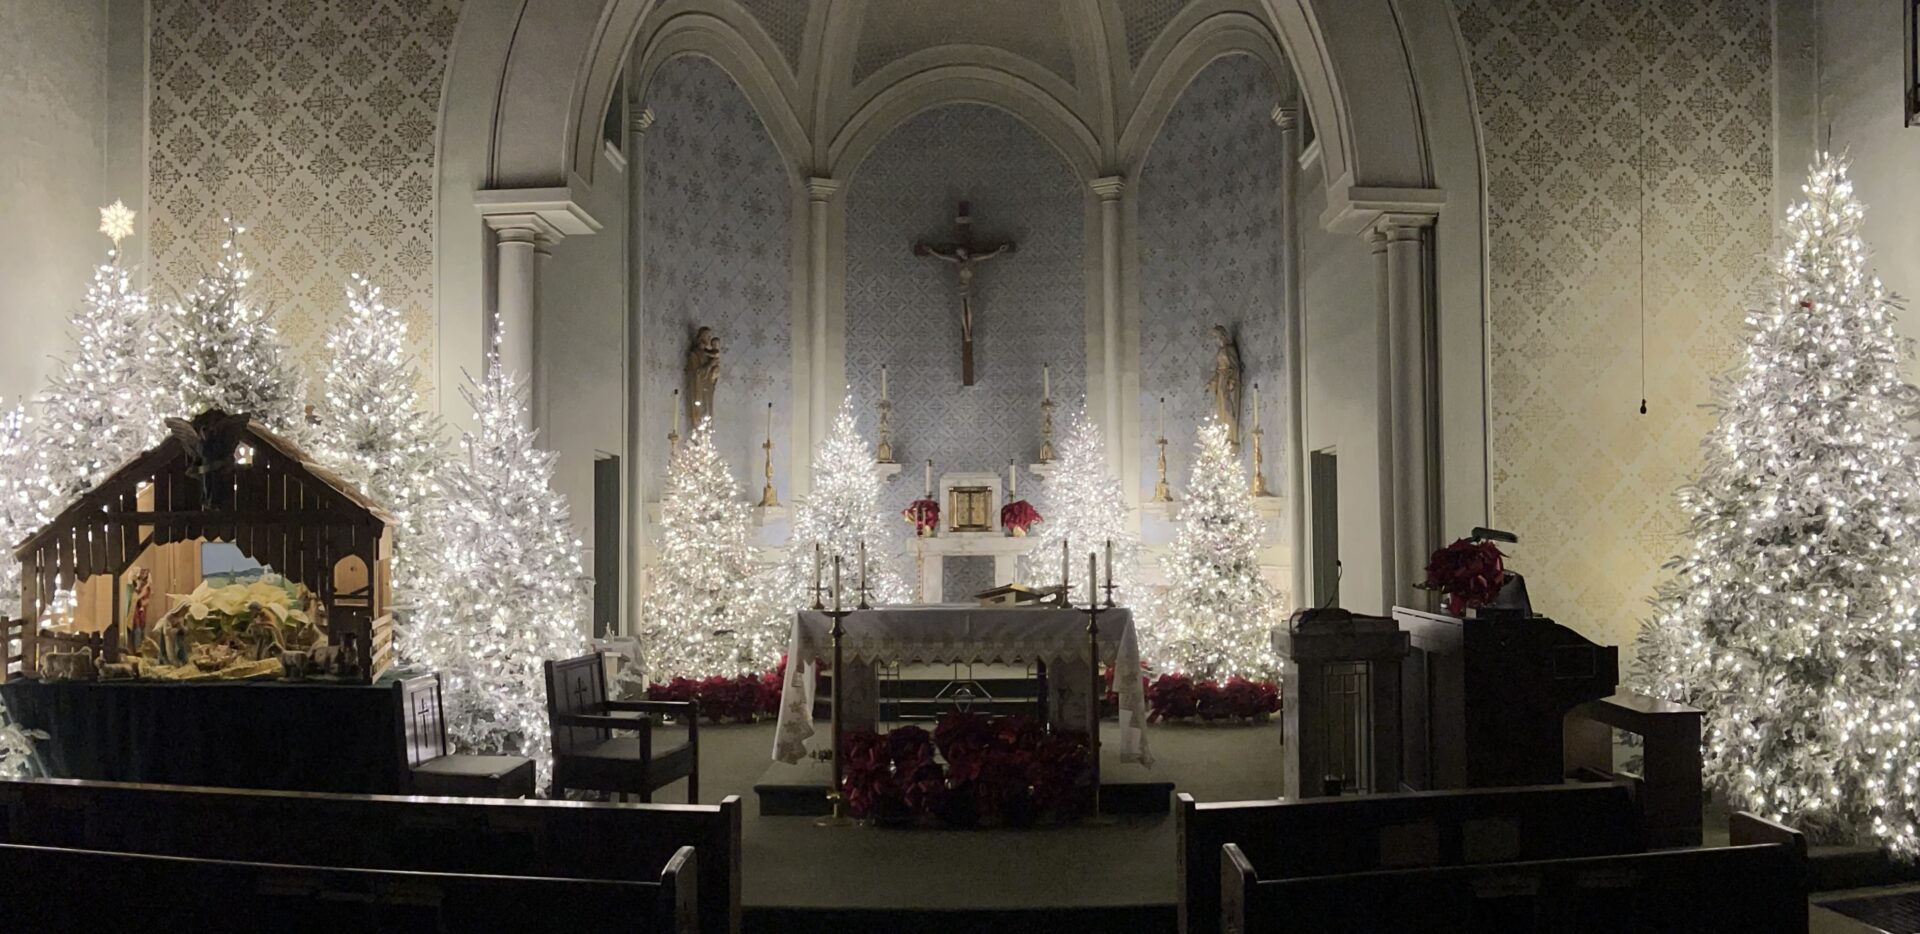 A beautiful view of the church with white Christmas trees